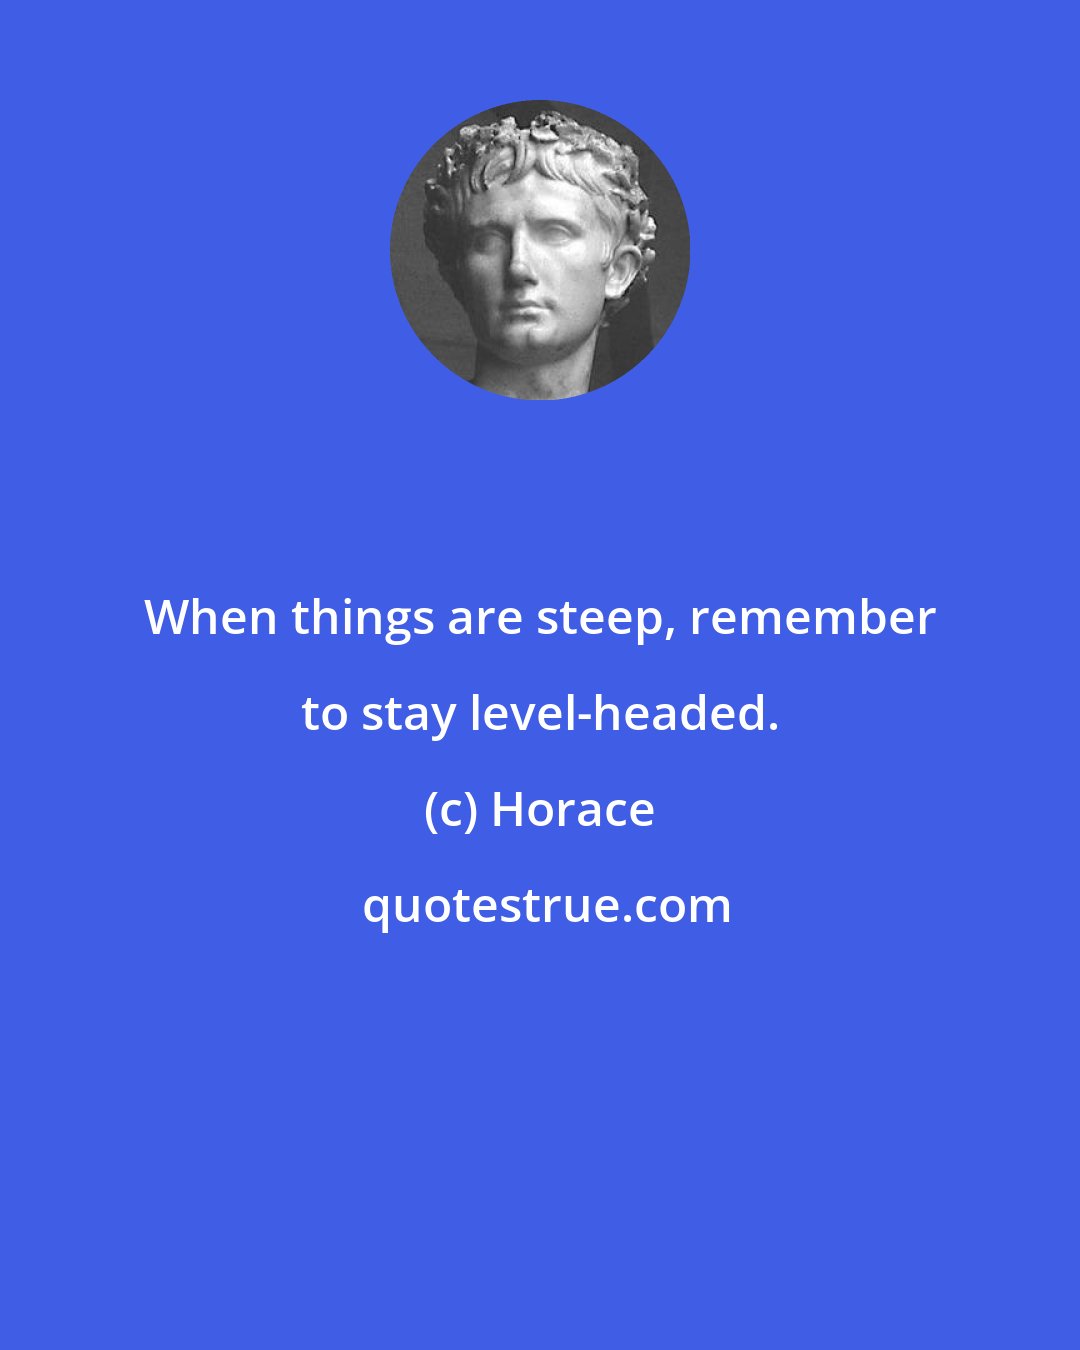 Horace: When things are steep, remember to stay level-headed.